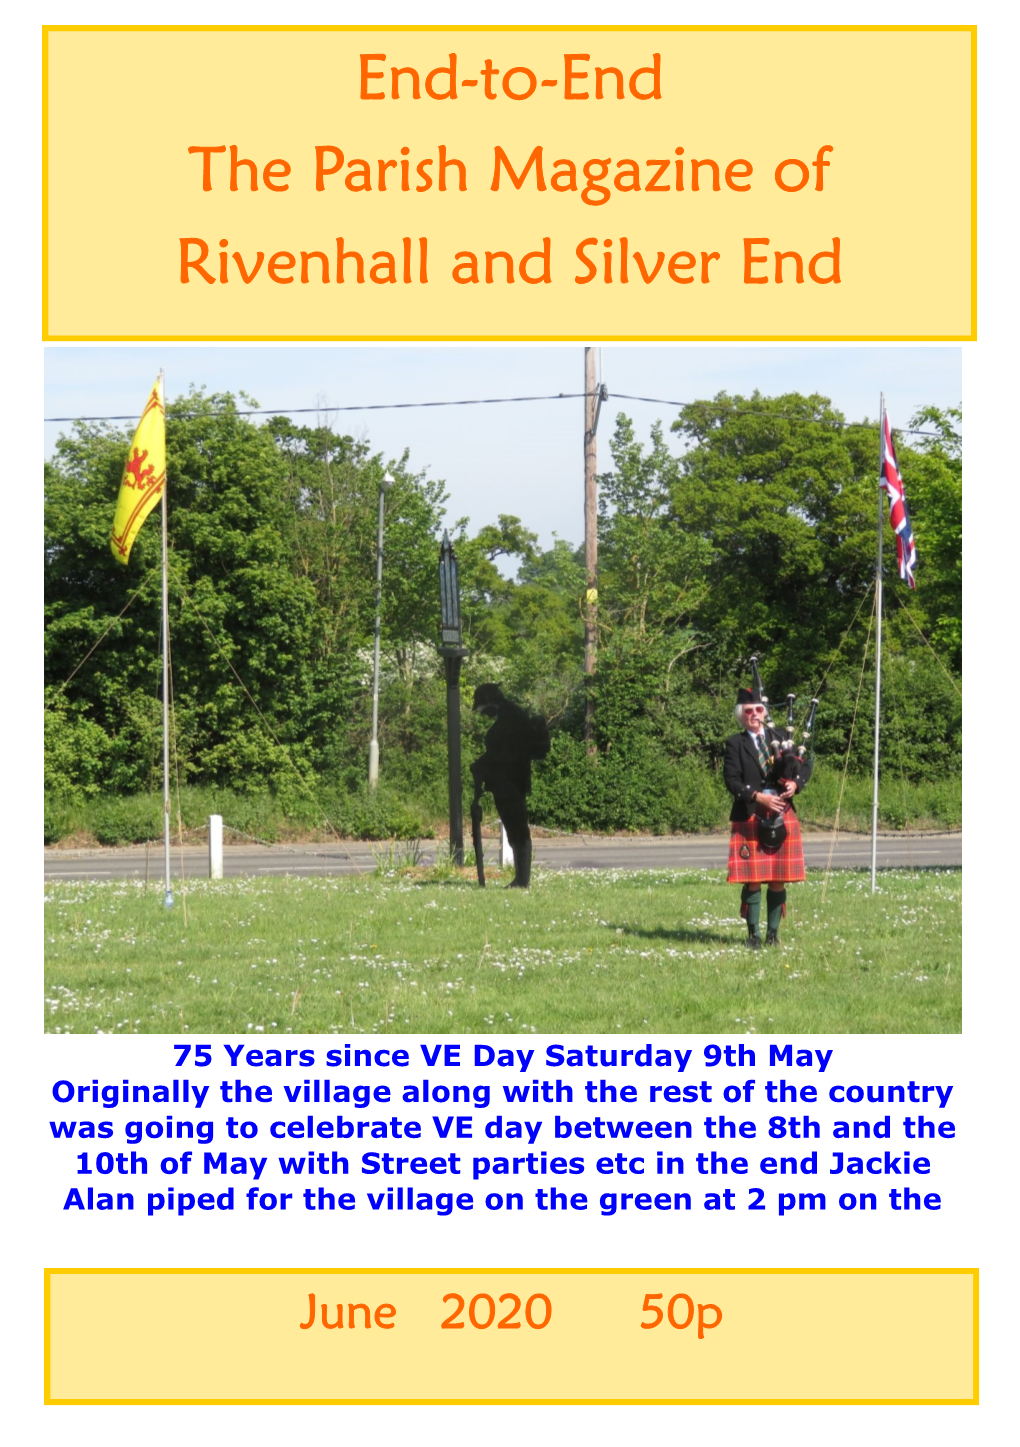 End-To-End the Parish Magazine of Rivenhall and Silver End